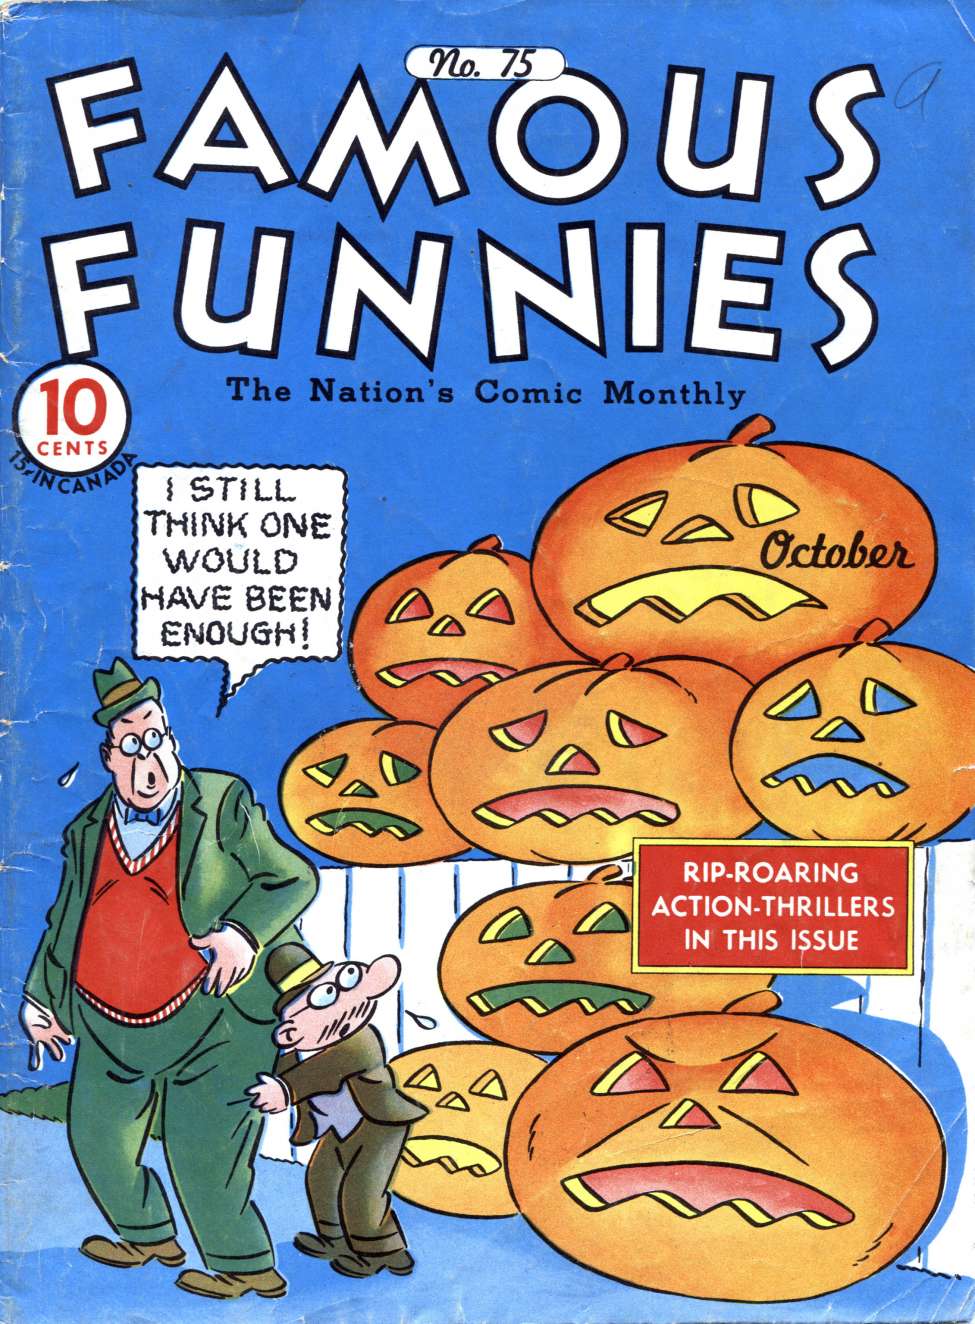 Comic Book Cover For Famous Funnies 75